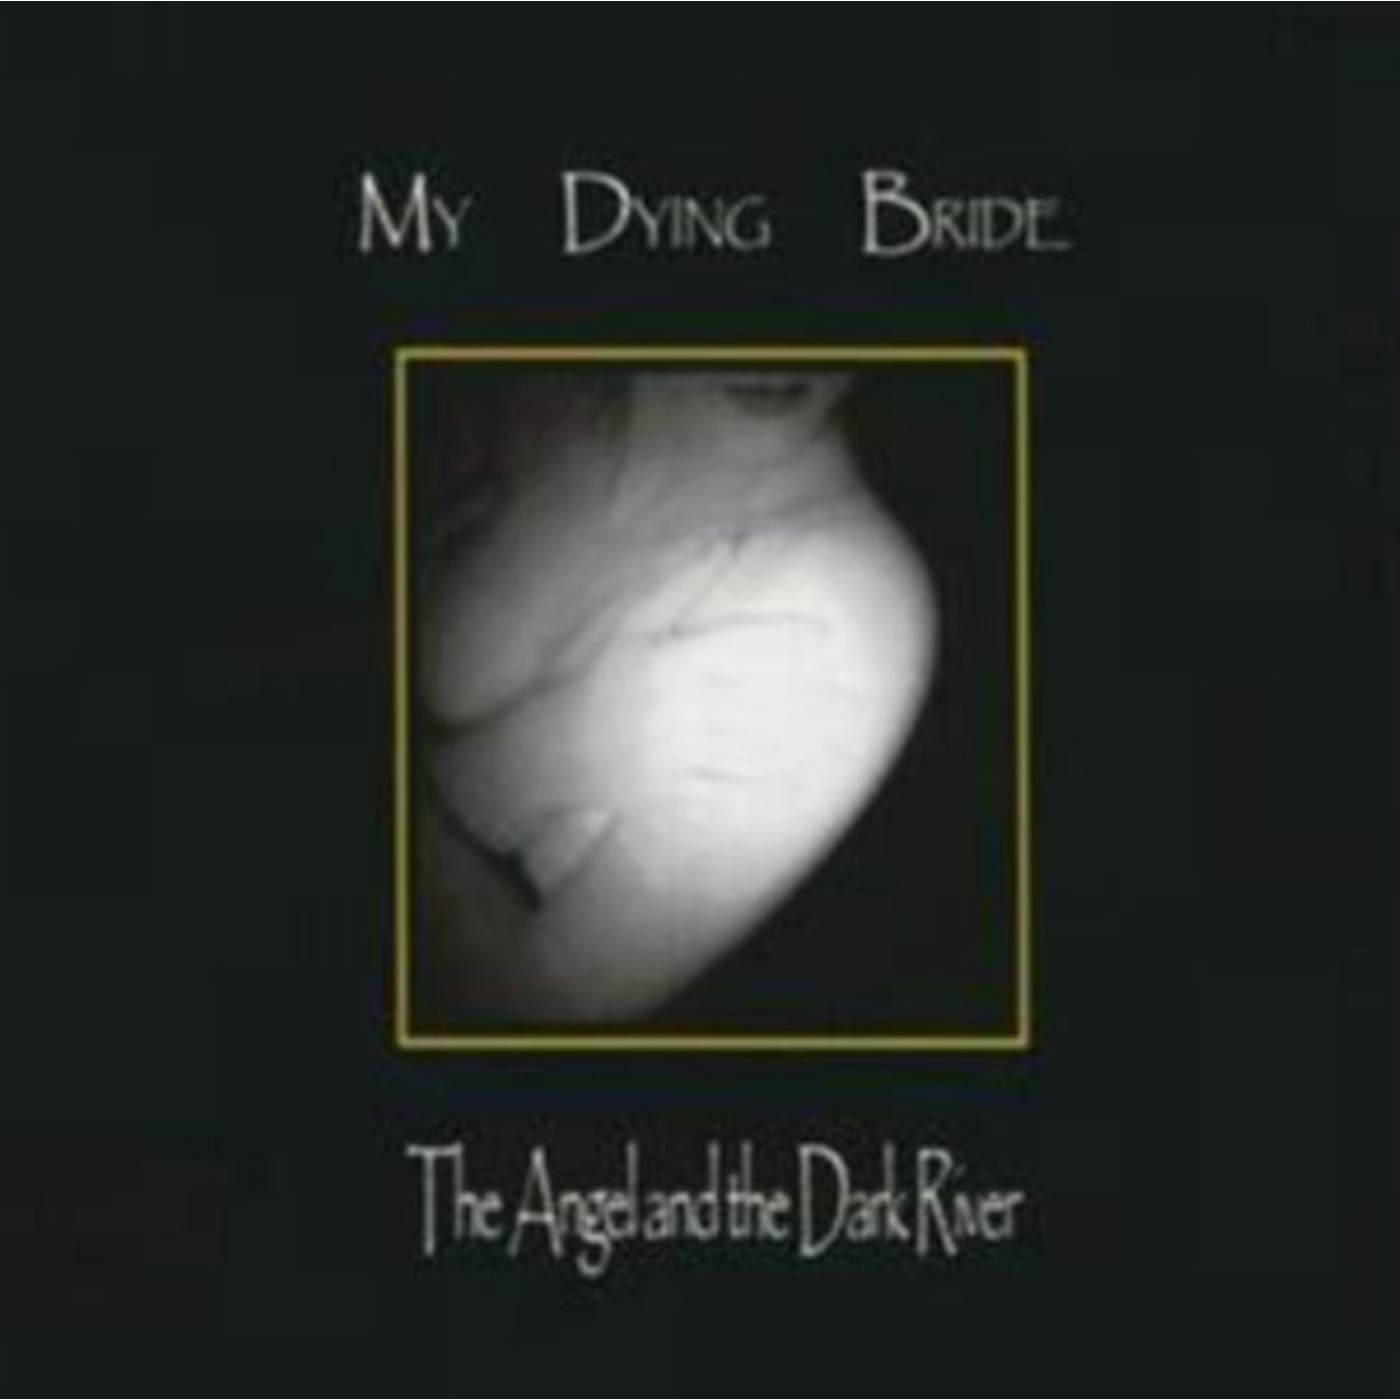 My Dying Bride CD - The Angel & The Dark River